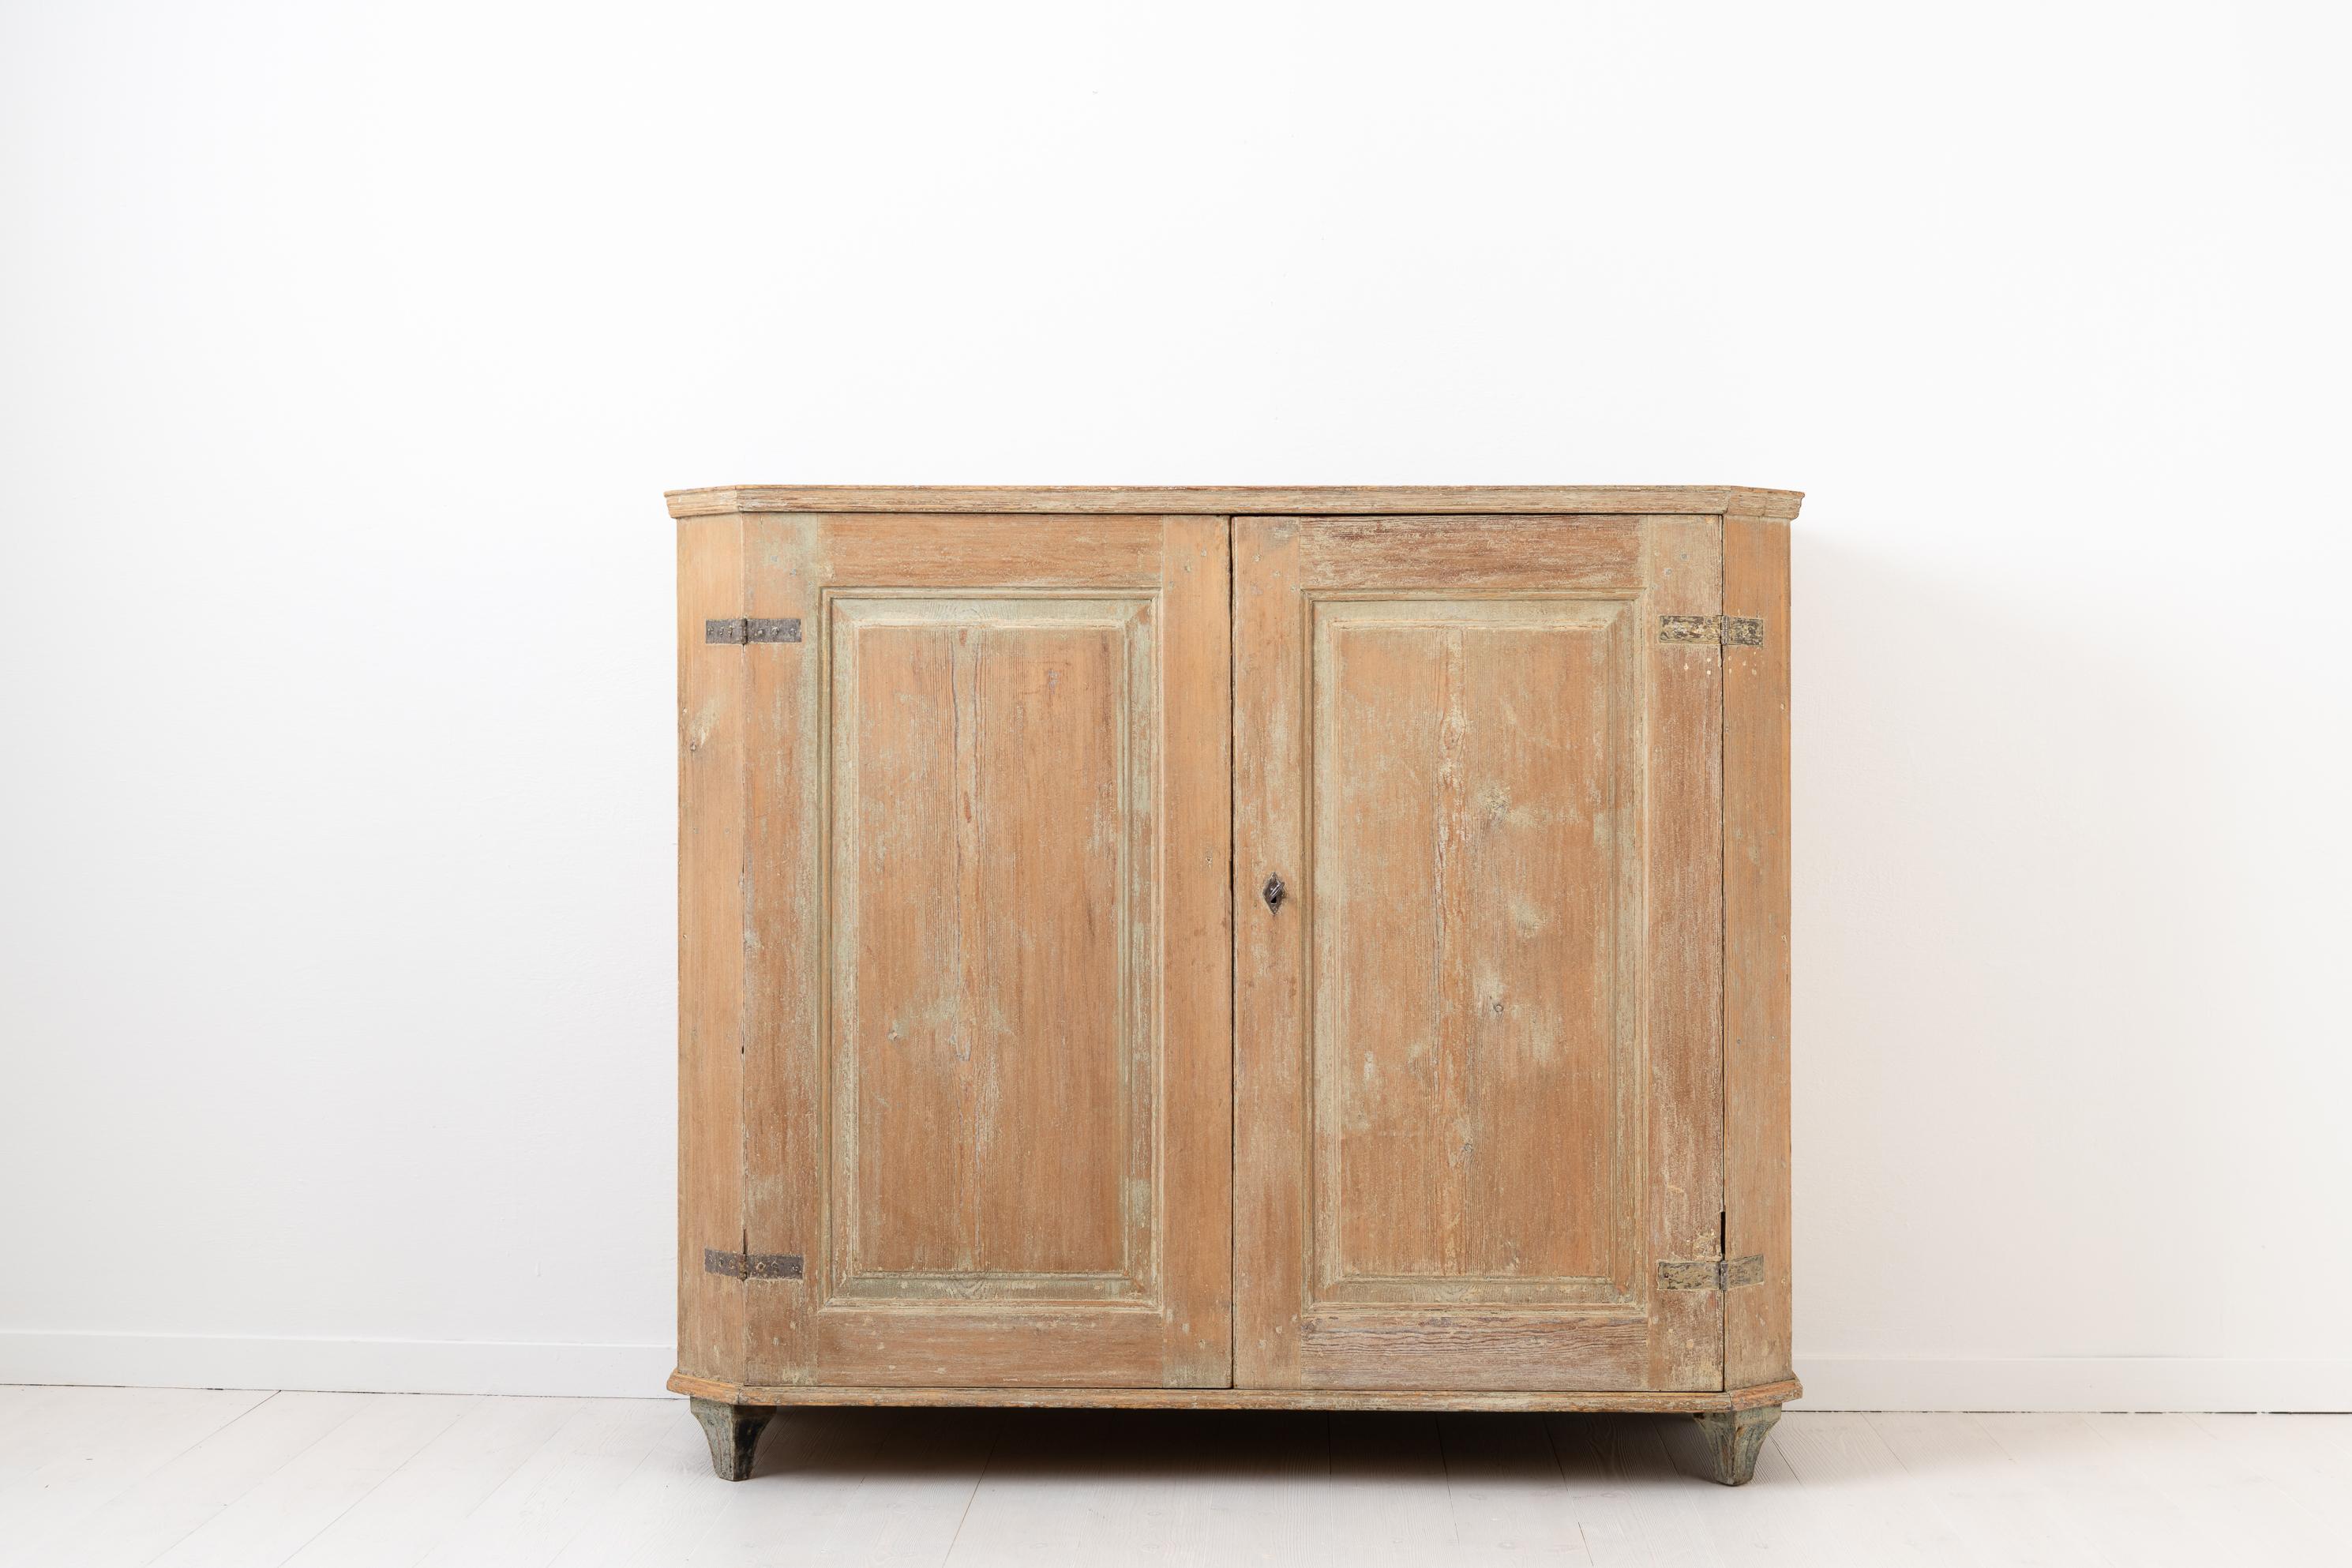 Swedish sideboard from the Gustavian and neoclassical period. The sideboard is made between 1790 and 1810 and has traces of the original paint. The interior is untouched and has a row of drawers with original paint and shelves which are and always